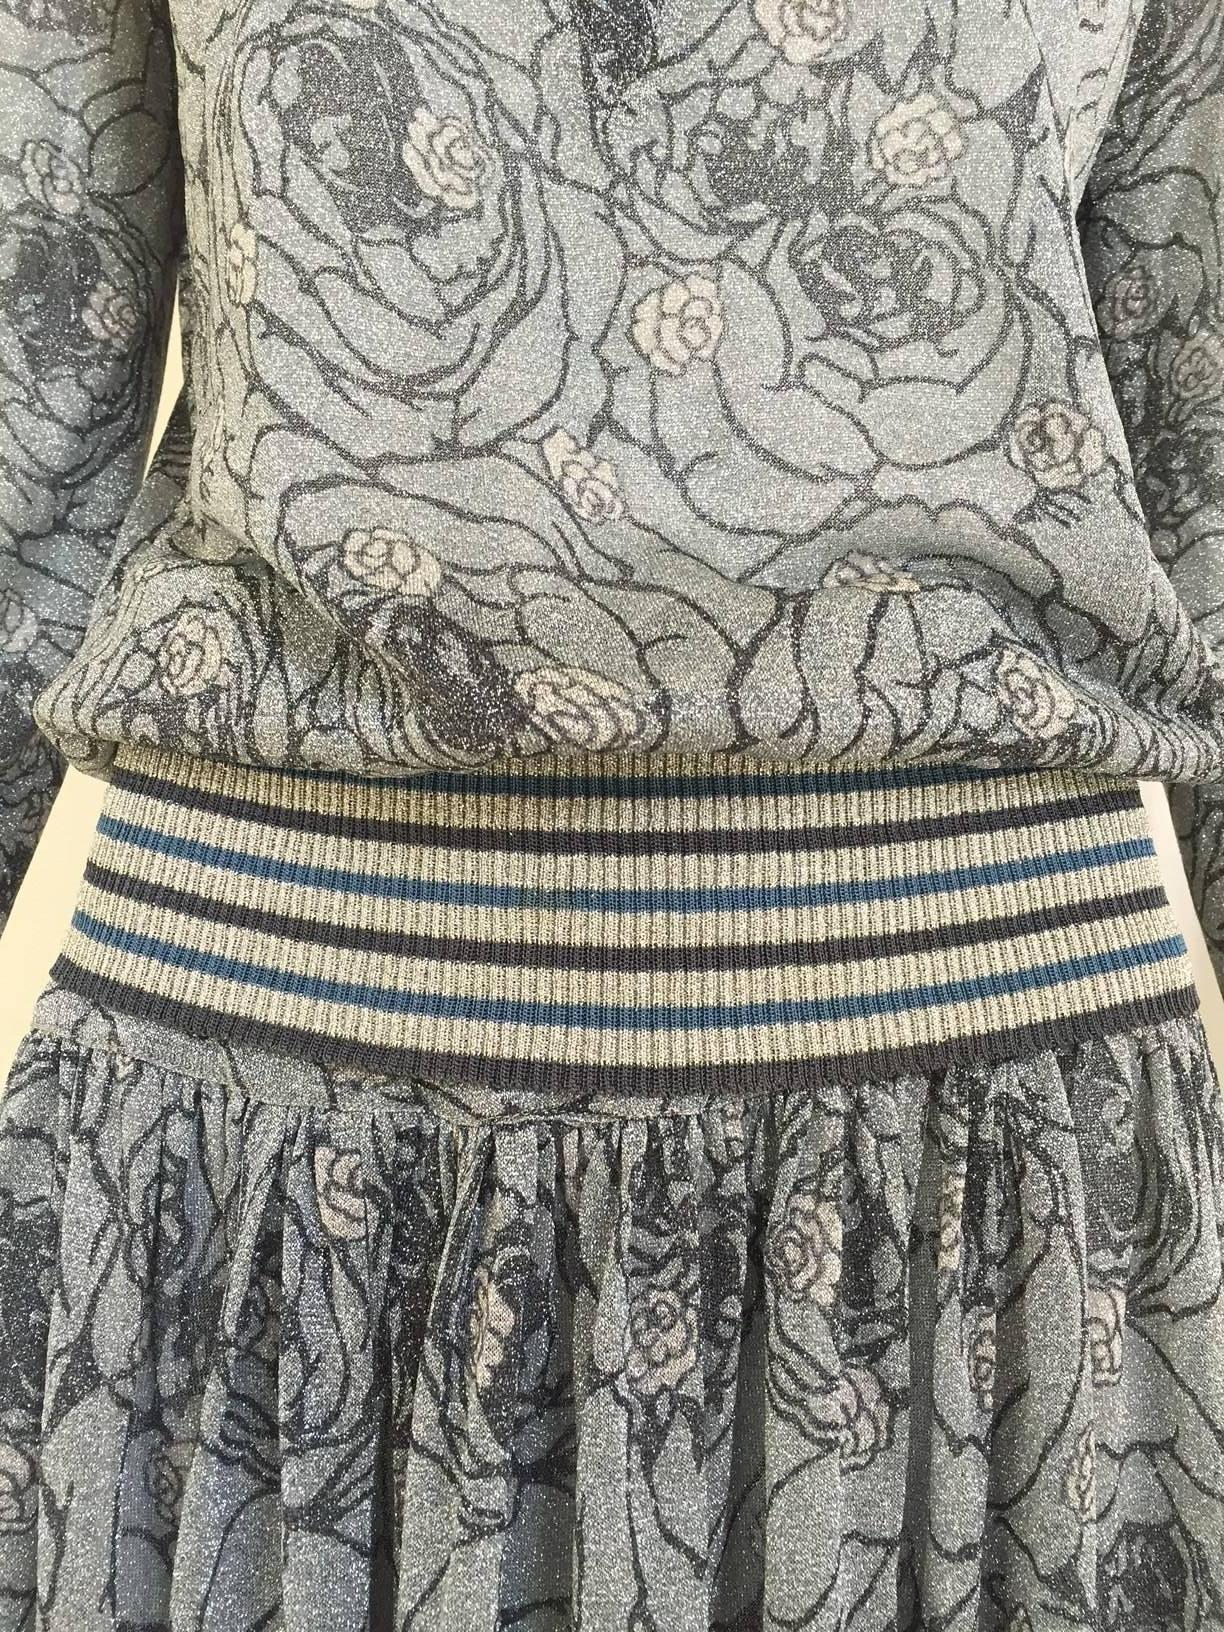 Gray 70s Missoni metallic grey and blue knit top and skirt set